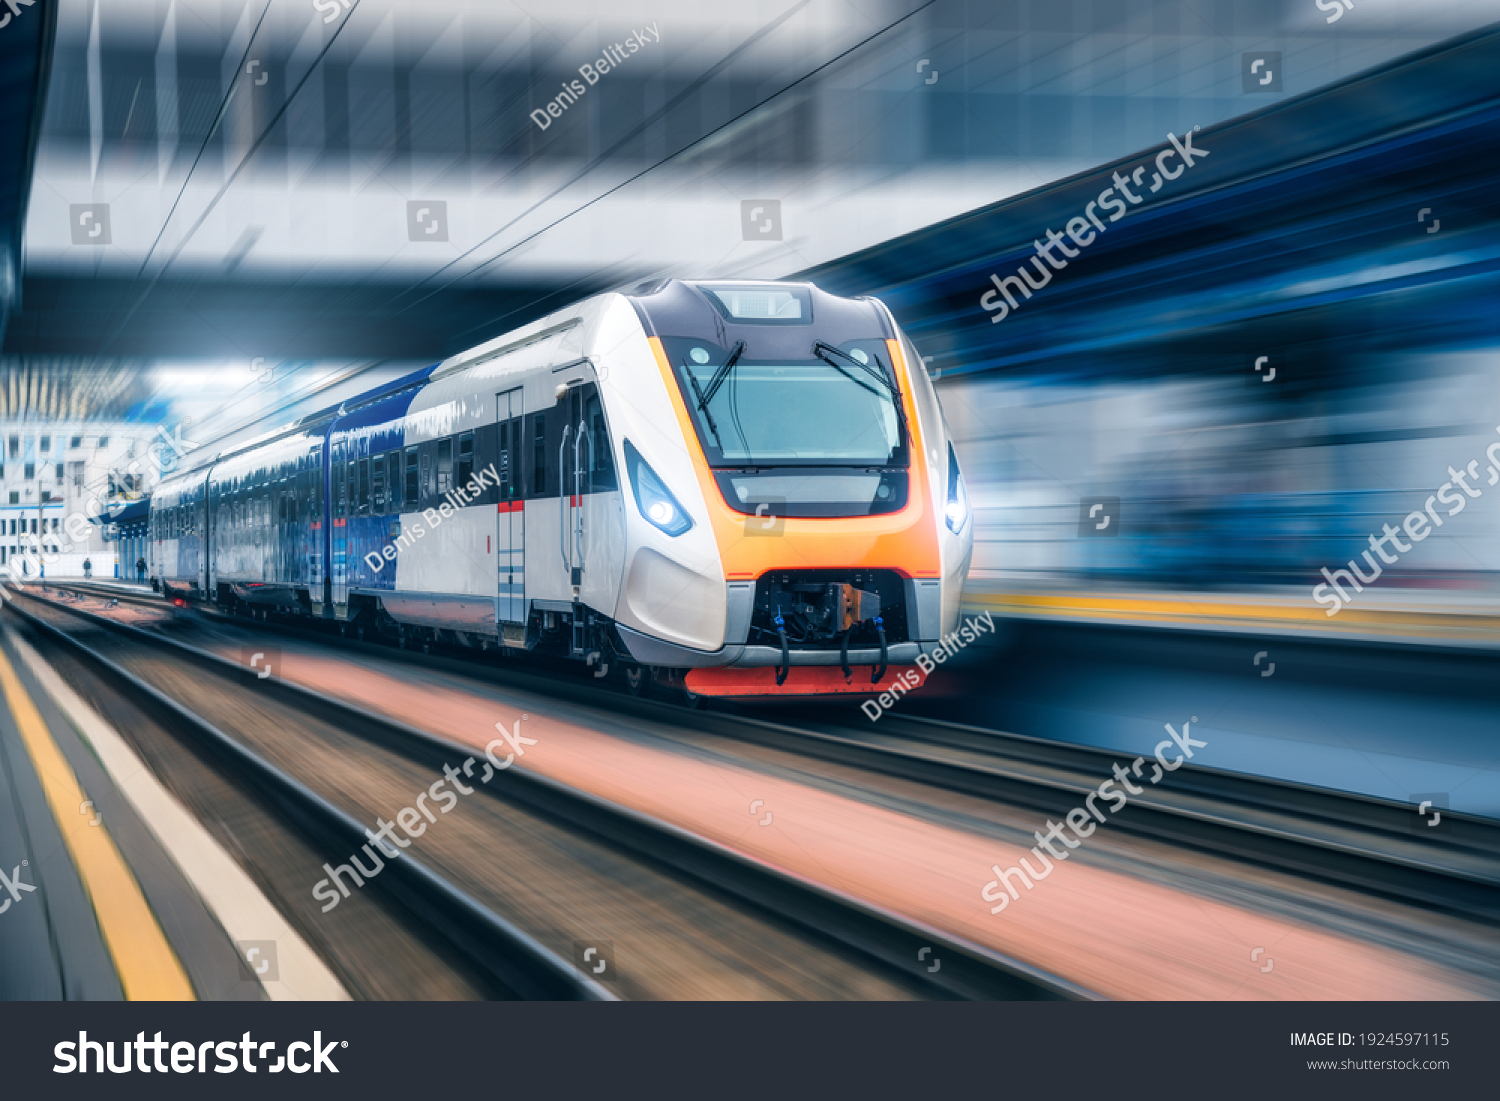 High speed train in motion on the railway station at sunset. Modern intercity passenger train with motion blur effect on the railway platform. Industrial. Railroad in Europe. Transportation. Industry #1924597115